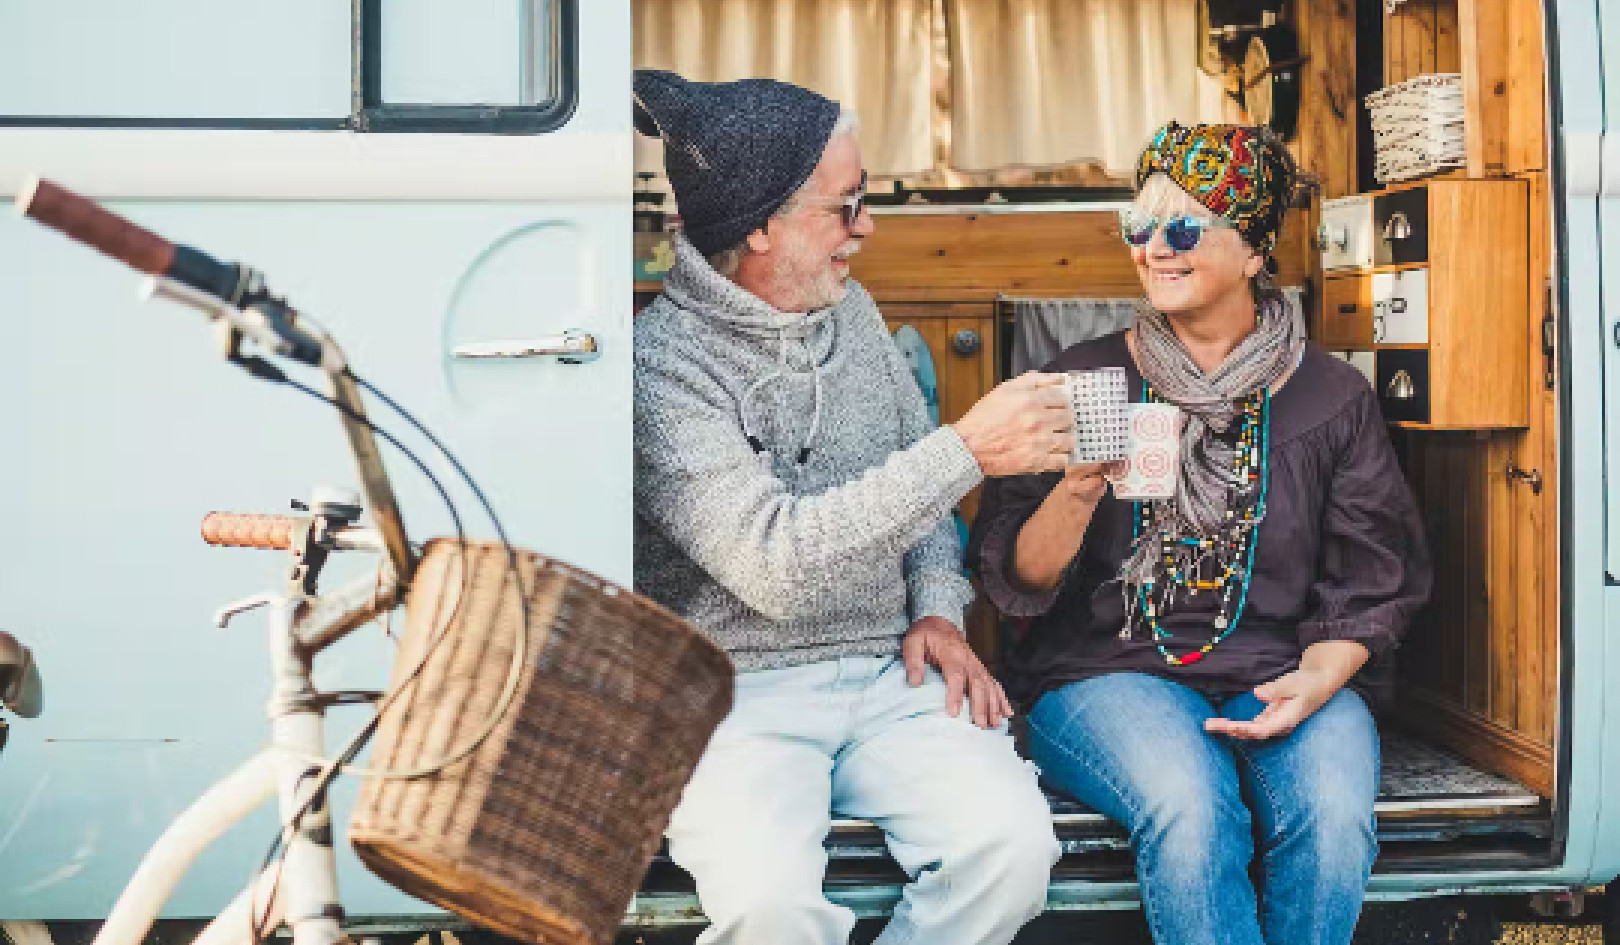 Why Some People Choose to Live the Nomadic Van Lifestyle